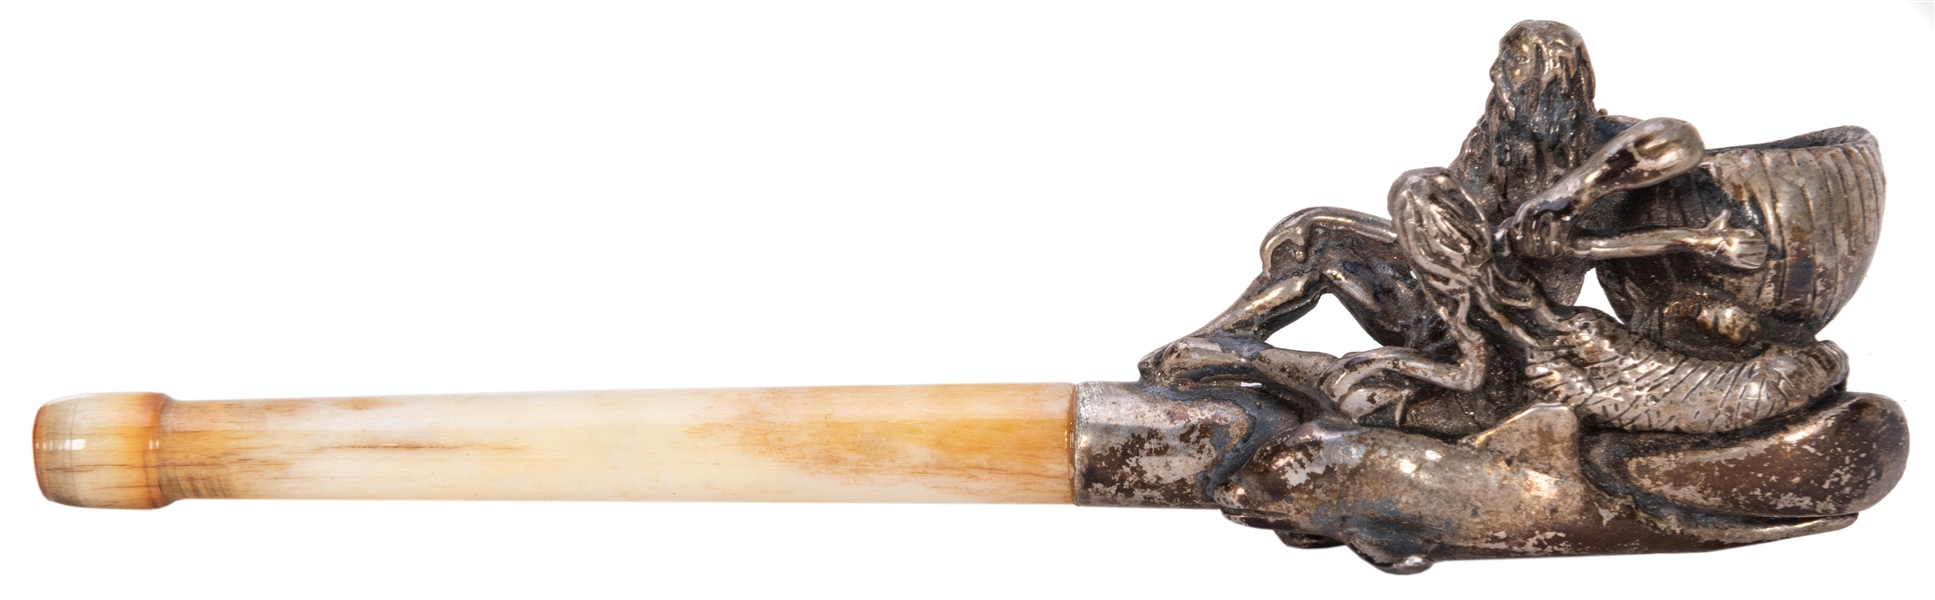  Bone and Silver Figural Hash Pipe. Depicting dolphins, a me...